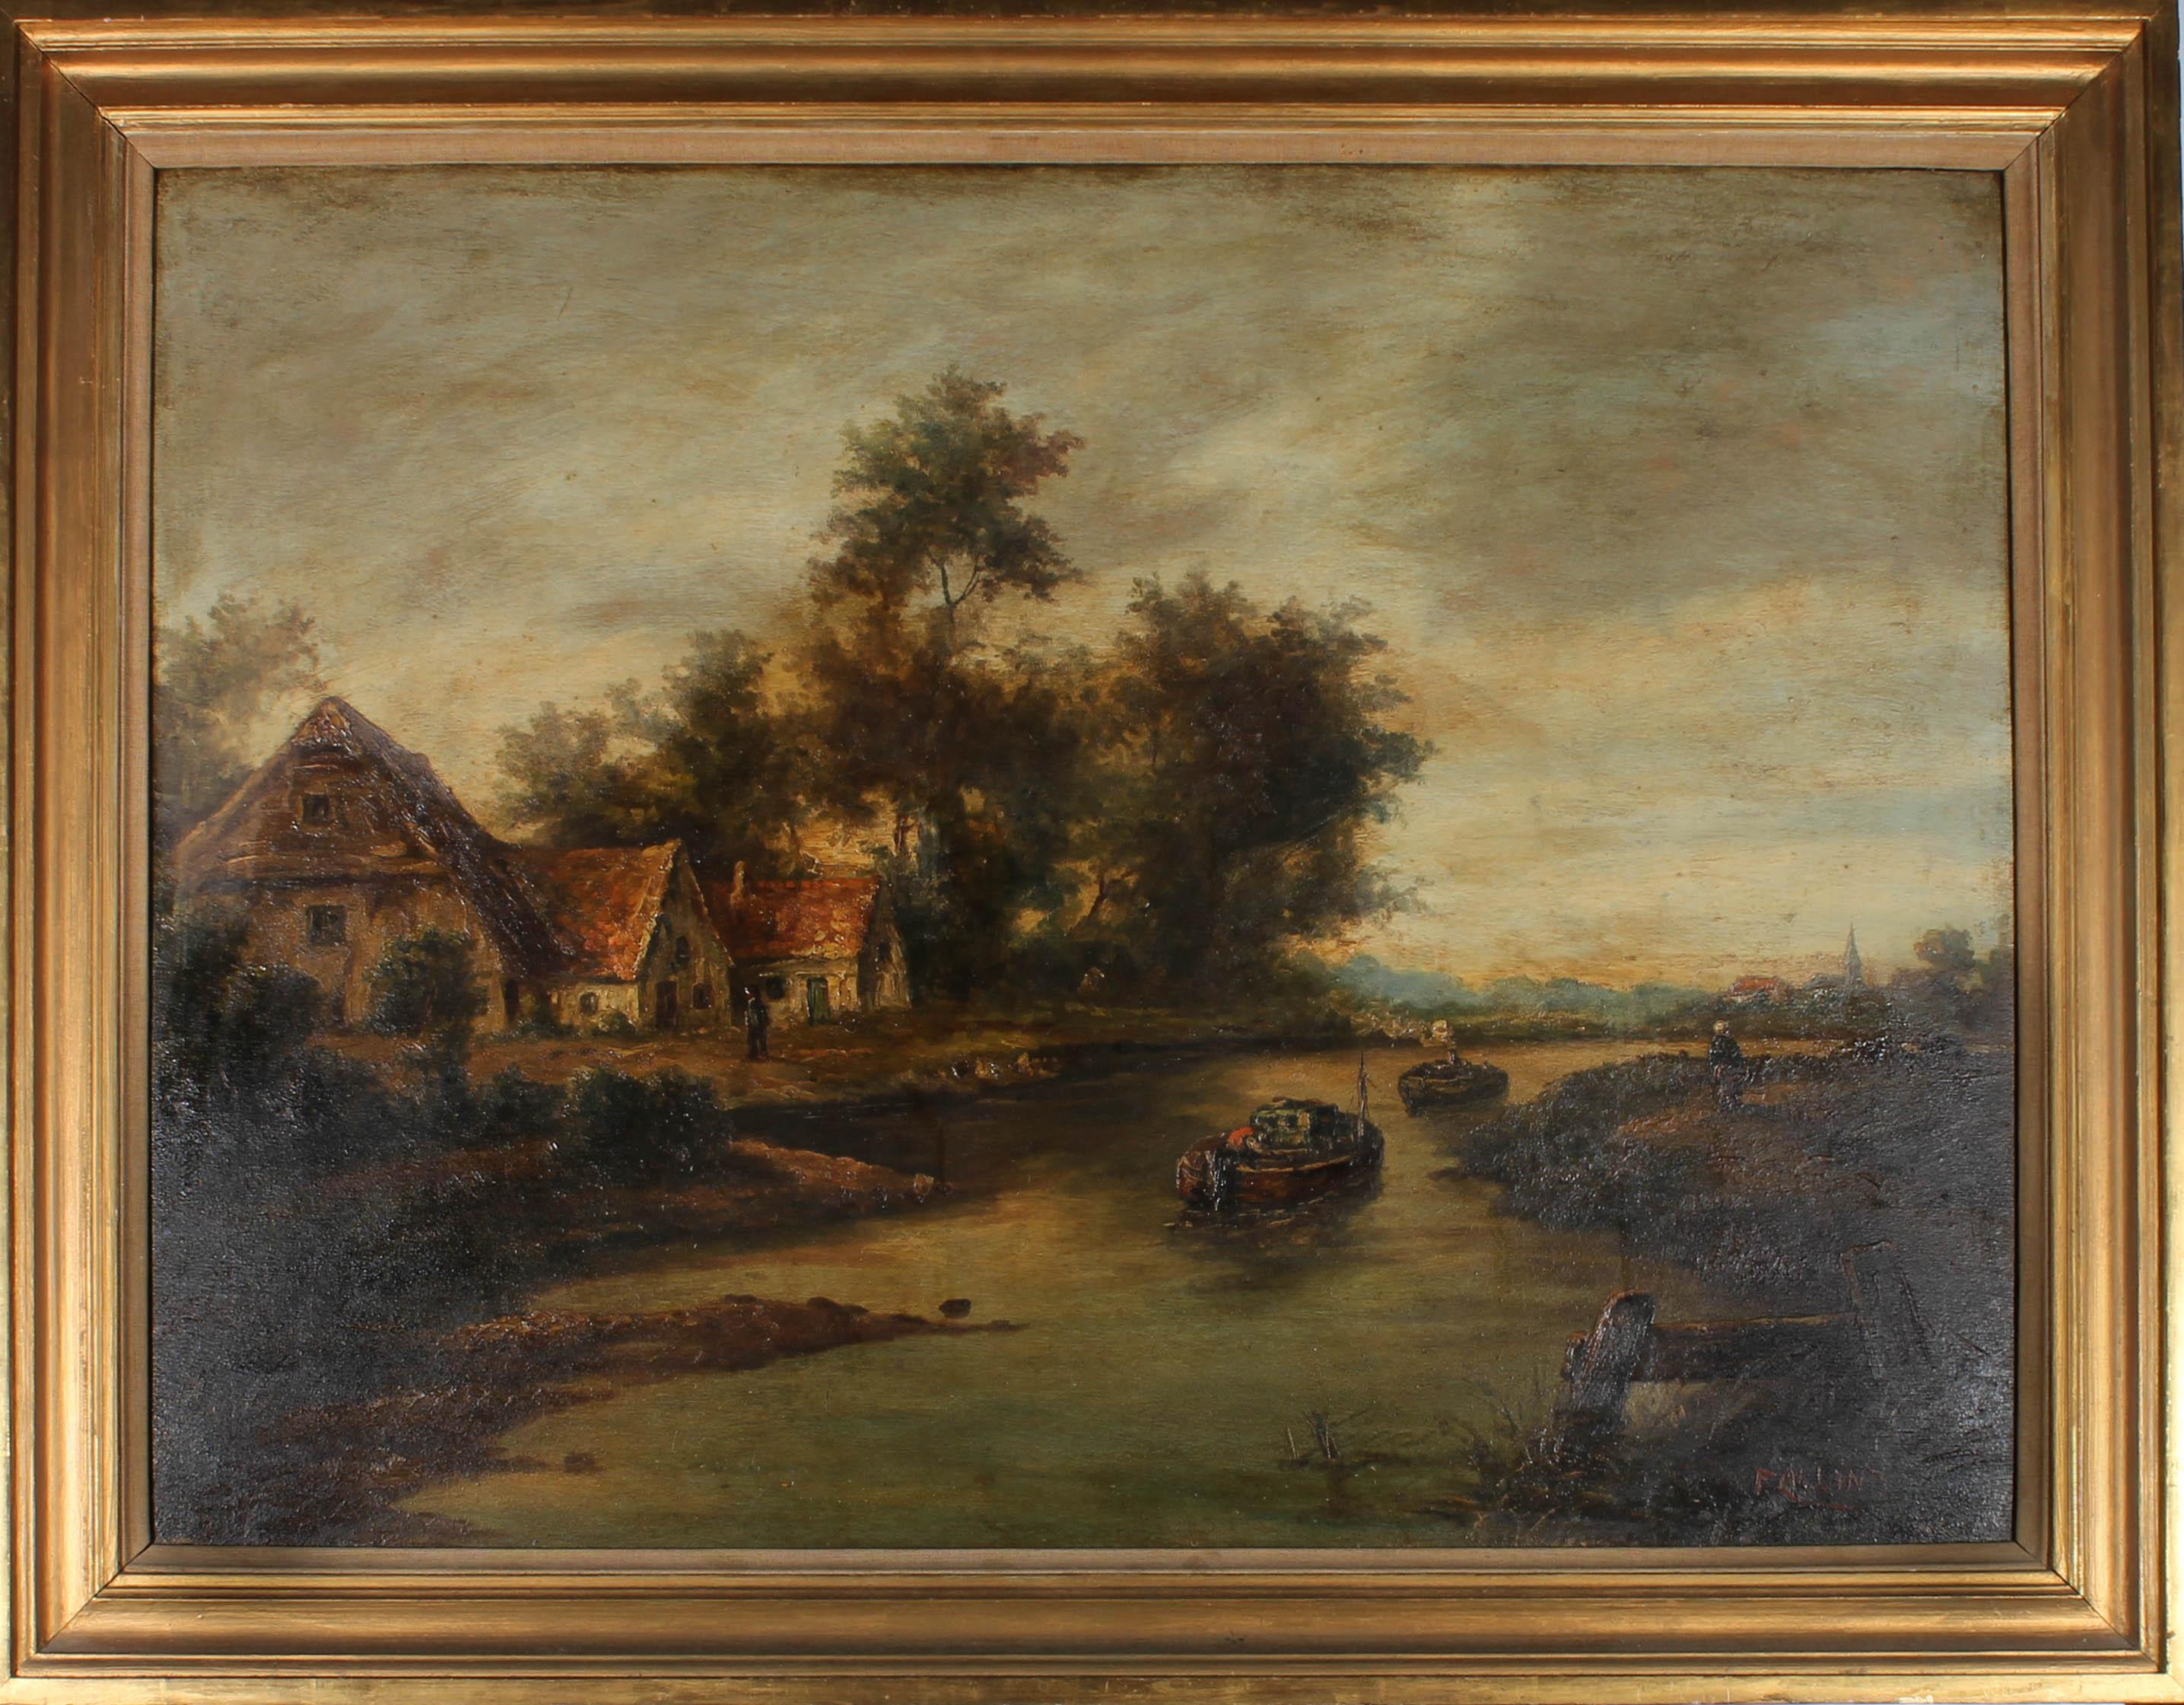 This delightful large-scale study depicts a quaint cottage on the river's edge with small fishing boats in the foreground. Signed to the lower right. Presented in a substantial gilt frame with a cotton slip. On panel .